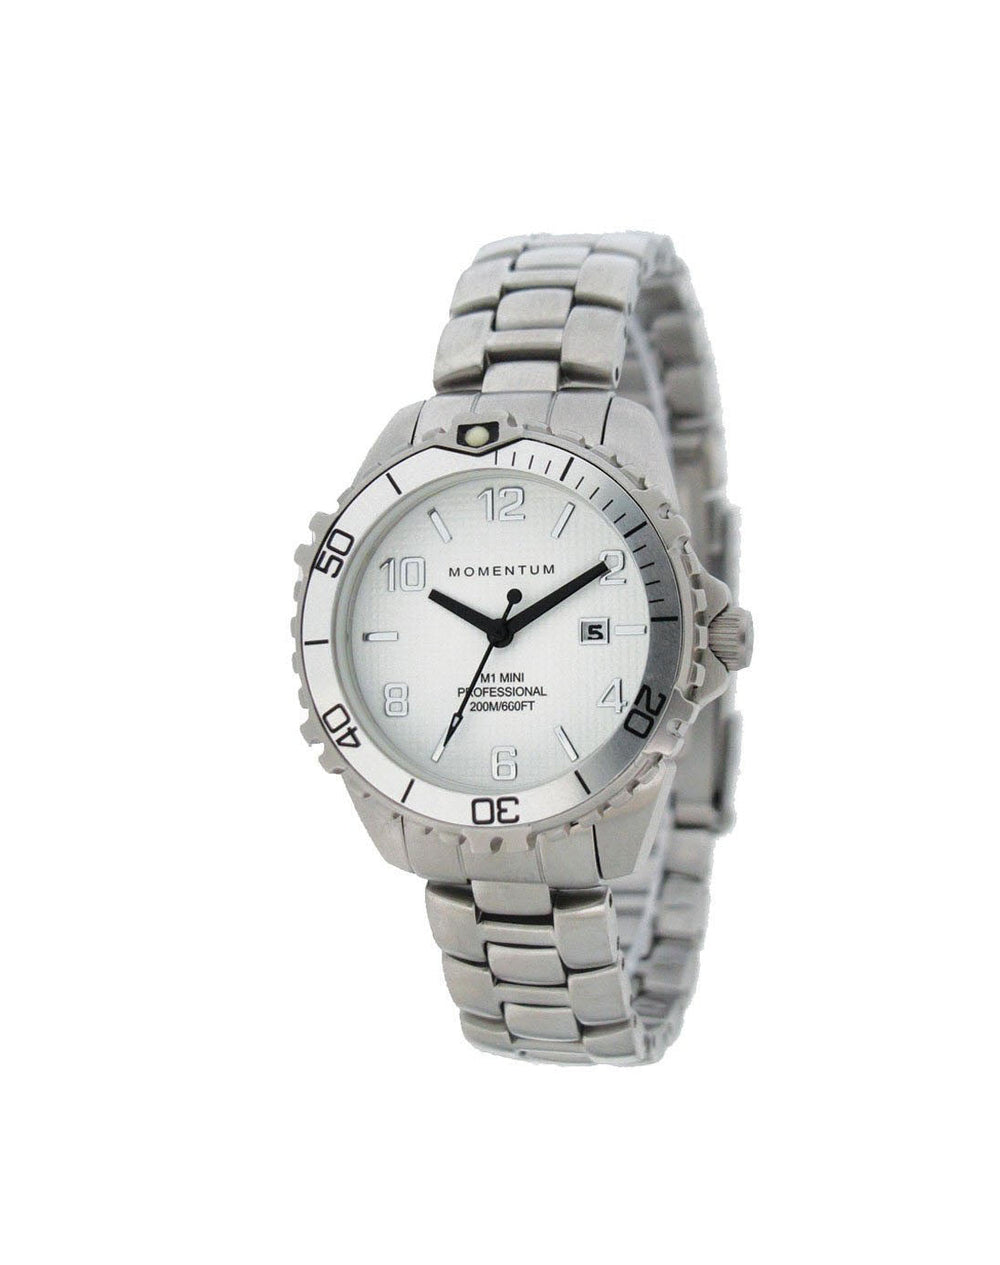 Momentum Momentum M1 MINI, SS, SML, SILVER, STEEL BRACELET by Oyster Diving Shop